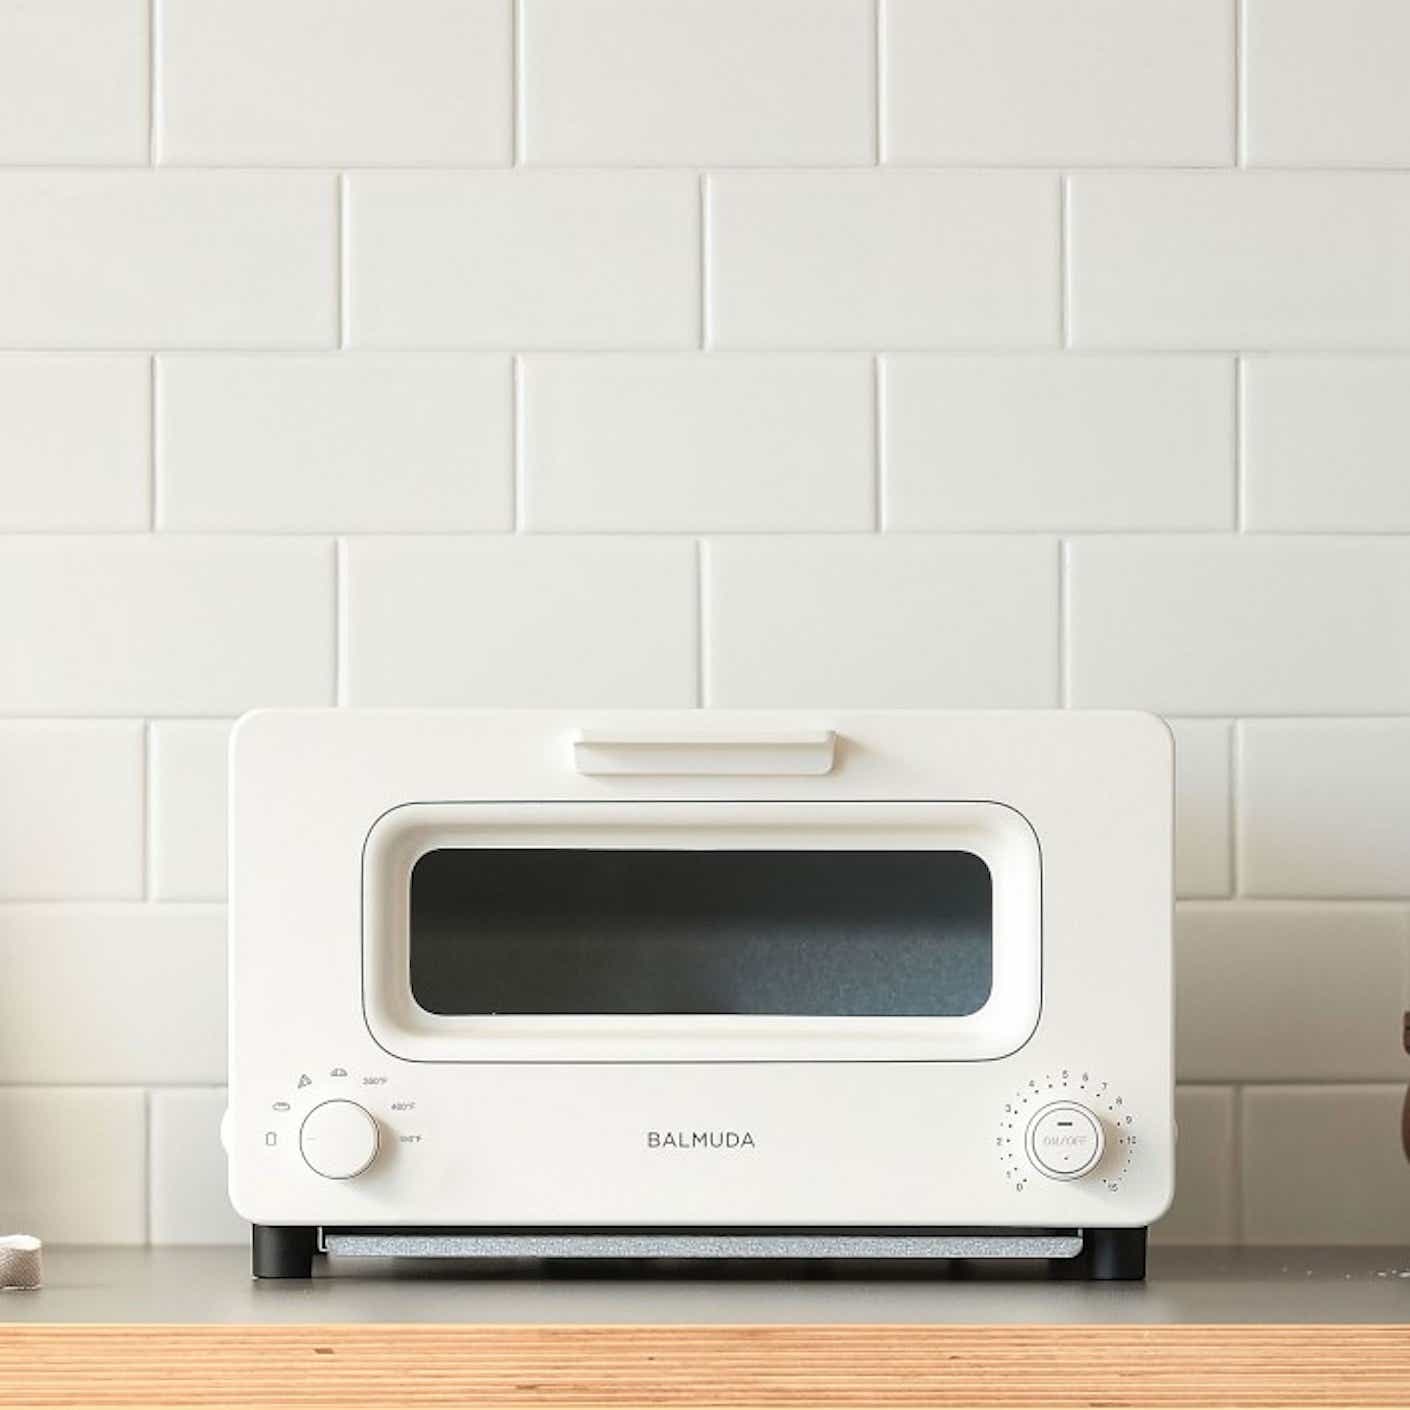 A white toaster oven with knobs sits on a plain countertop in front of a white tiled wall.